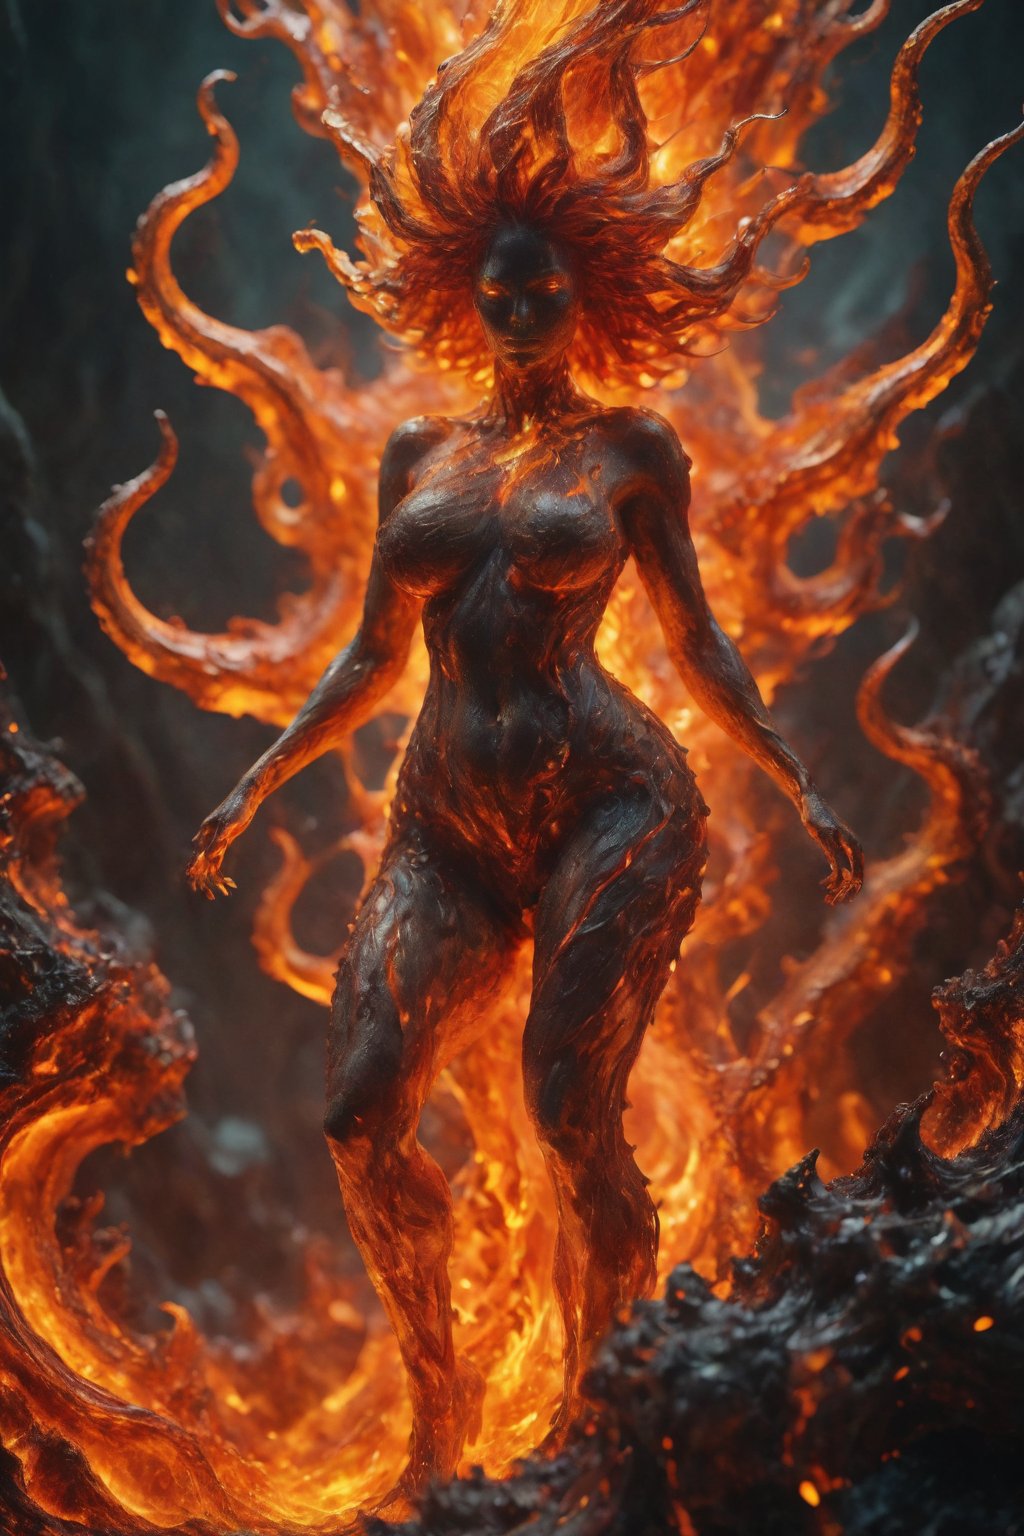 Close-up shot of a female lava monster, her glowing, molten skin reflecting the heat of the Earth's core as she emerges from the depths. Her massive, pear-shaped figure is accentuated by two massive breasts that jut outward, defying gravity and held aloft by a network of glowing, tentacle-like hair. Her body is adorned with countless more of these tentacles, twisting and writhing around her form like a living flame. She stands in a superheroic stance, her legs planted firmly apart, her arms bent at the elbow, hands curled into fists as if she's prepared to unleash an eruption of fiery fury upon the world above. Her eyes, glowing with an inner light, seem to stare out at the world with a mixture of determination and anger. The surrounding lava flows around her, seemingly parting before her as she forces her way to the surface, ready to take on whatever challenges await her on the world above. (highly detailed:1.4), (extremely detailed:1.4), (epic realism:1.4),futuristic alien